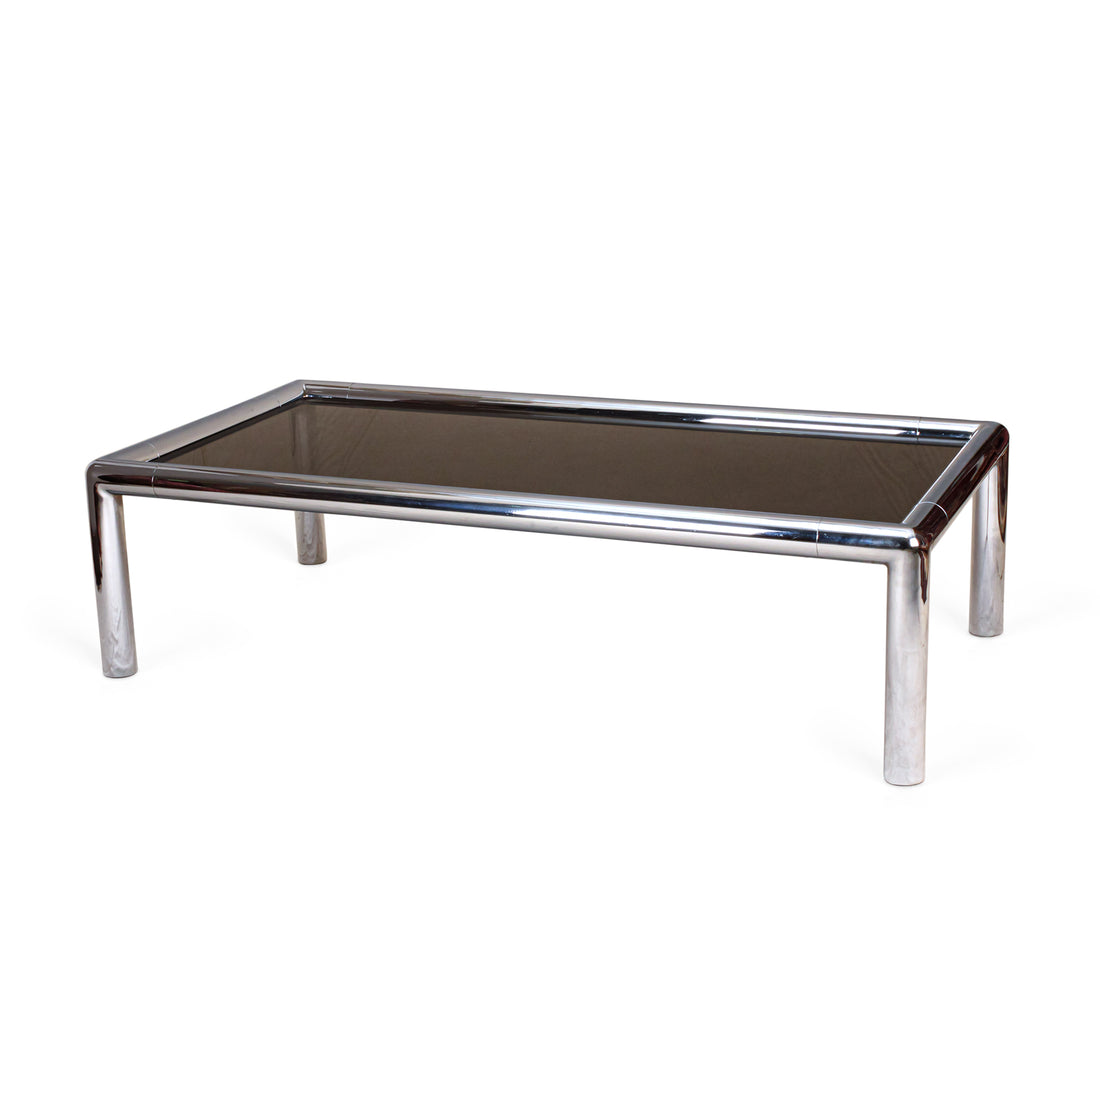 Vintage Chrome Tubo-Style Coffee Table with Smoked Glass